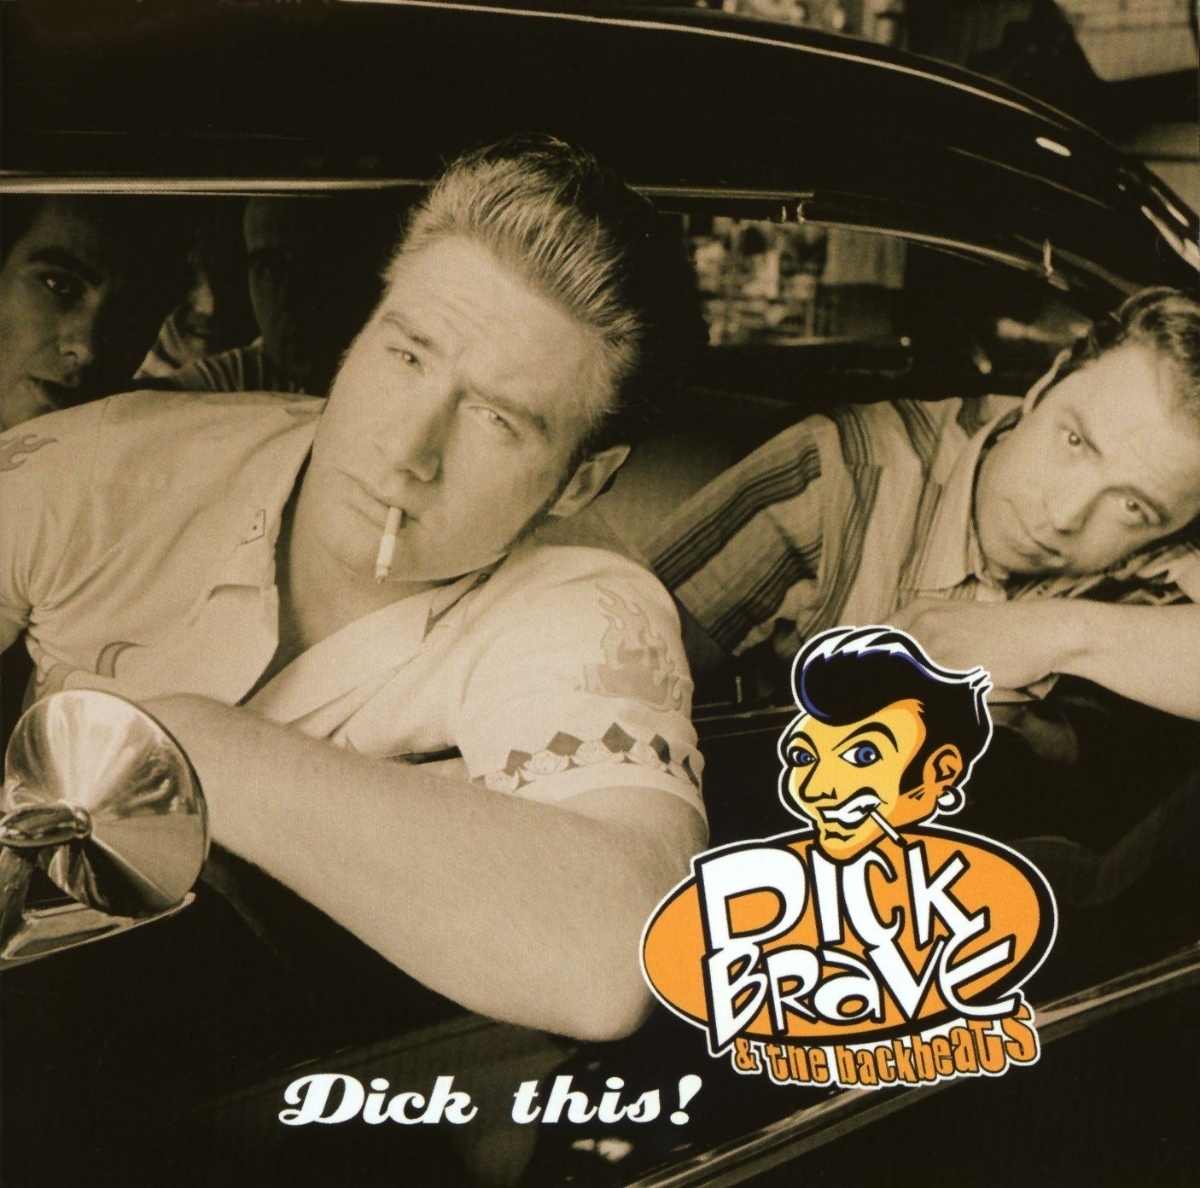 Dick this! - Dick Brave & The Backbeats. (CD)